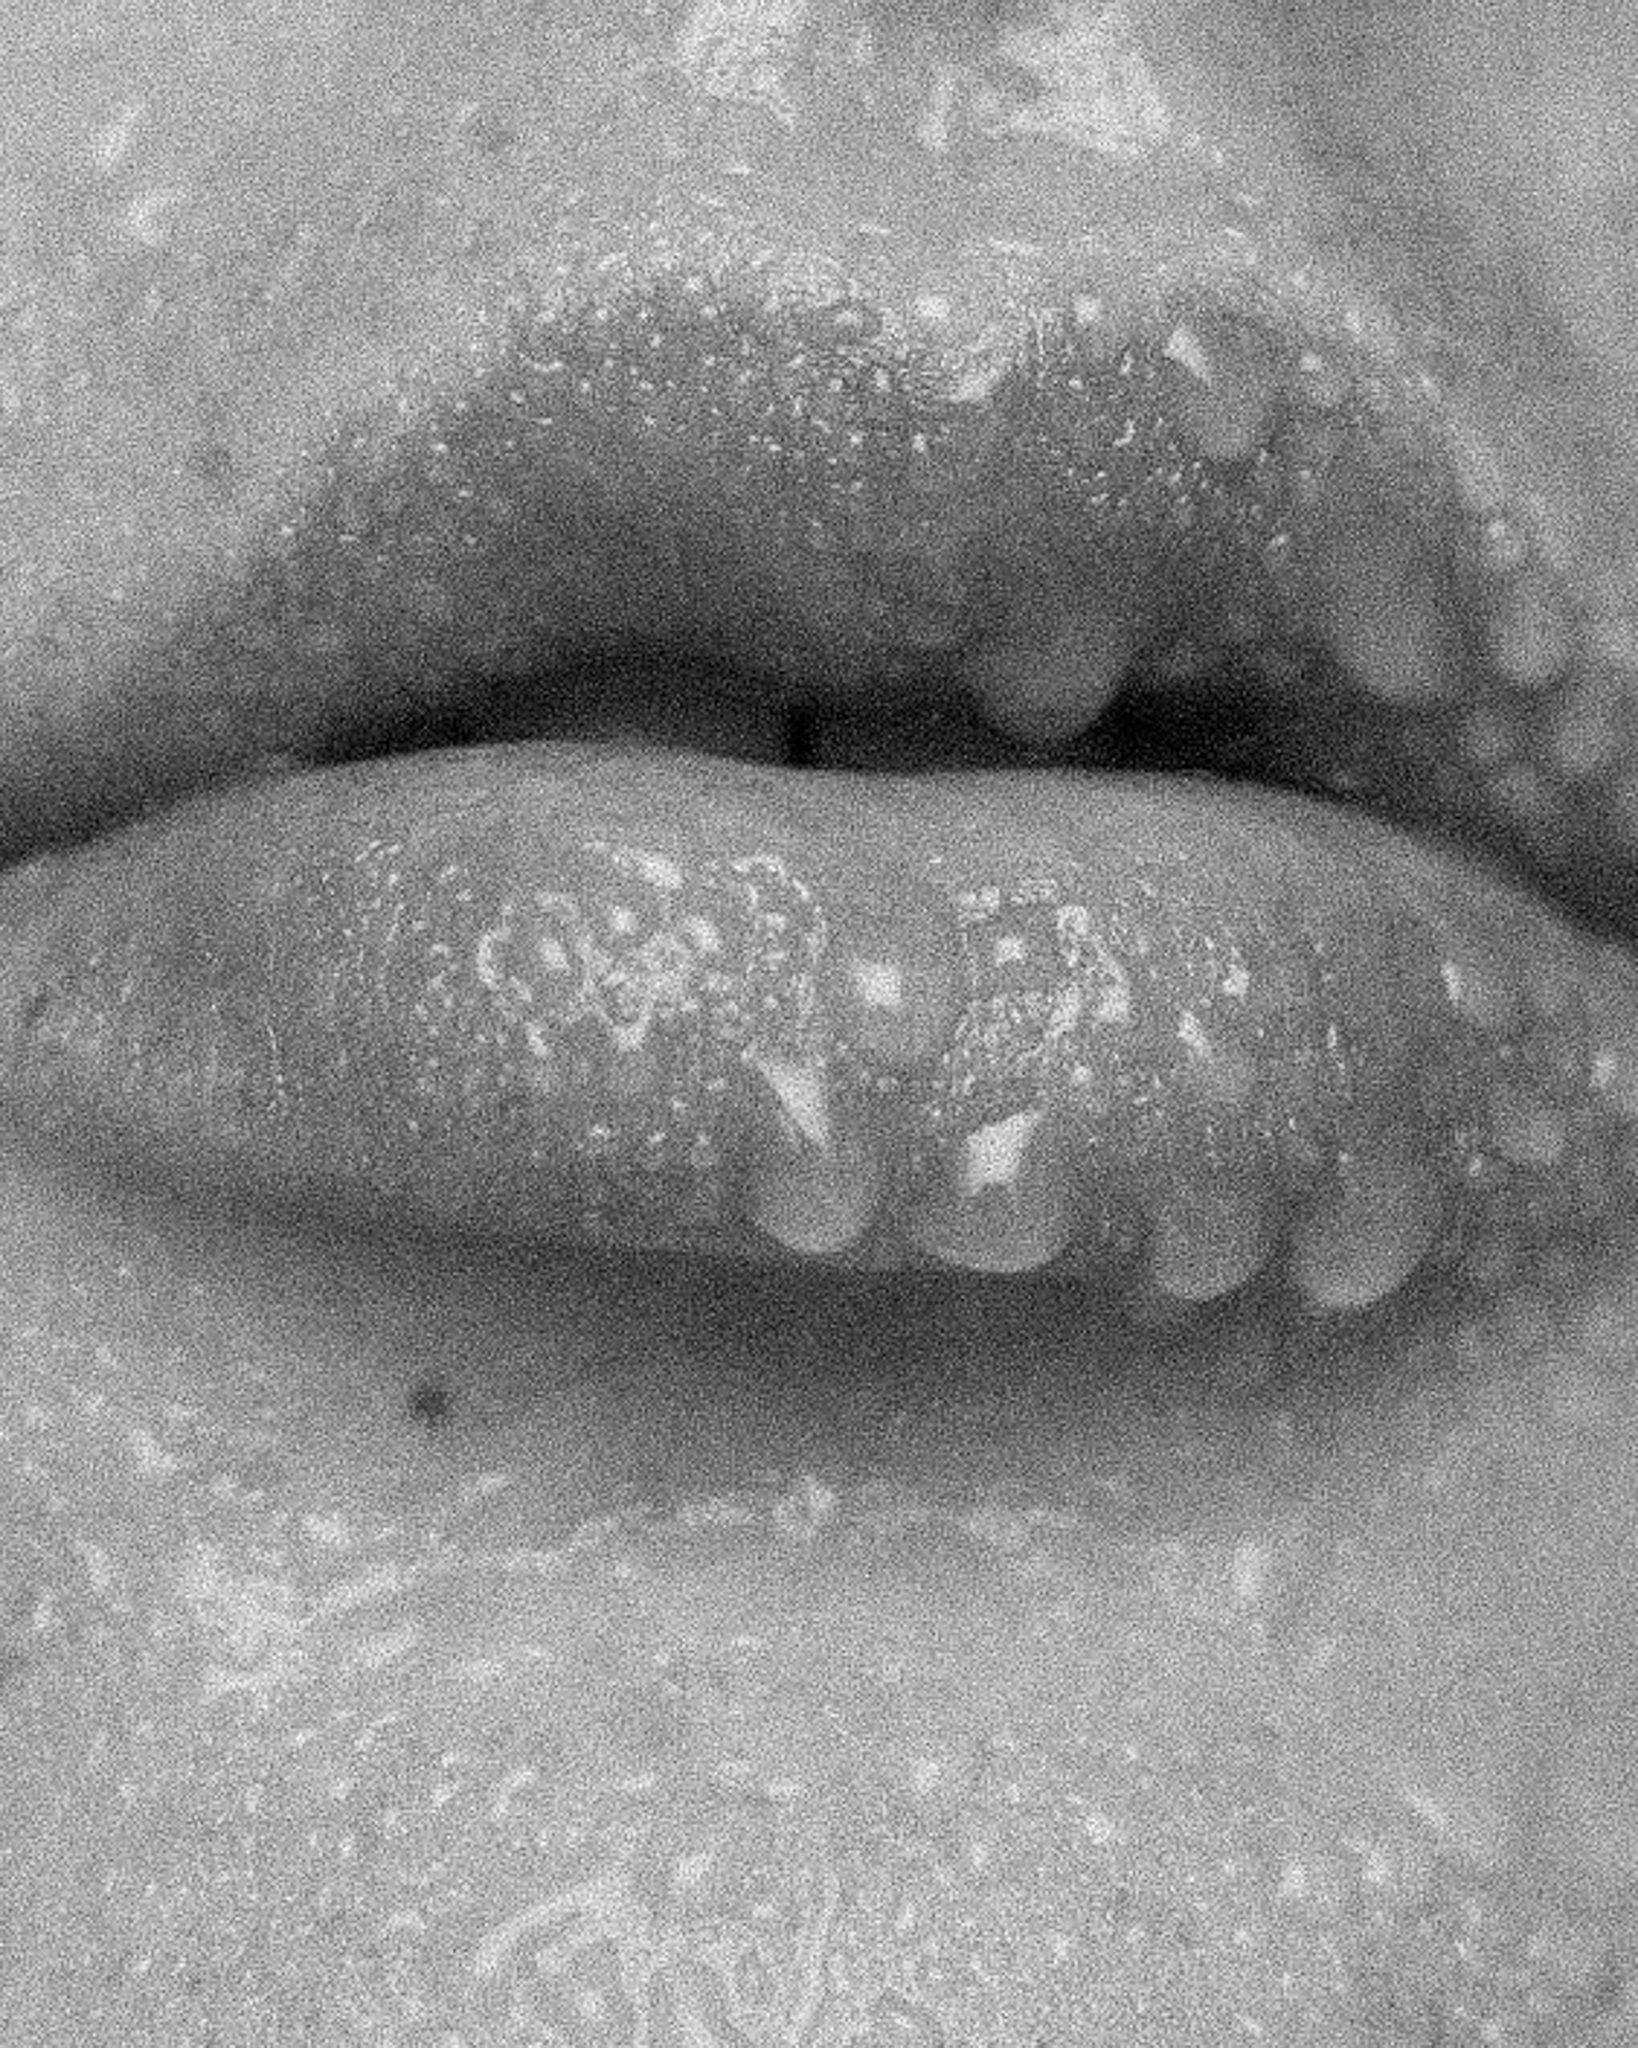 BW close up of lips with water drops